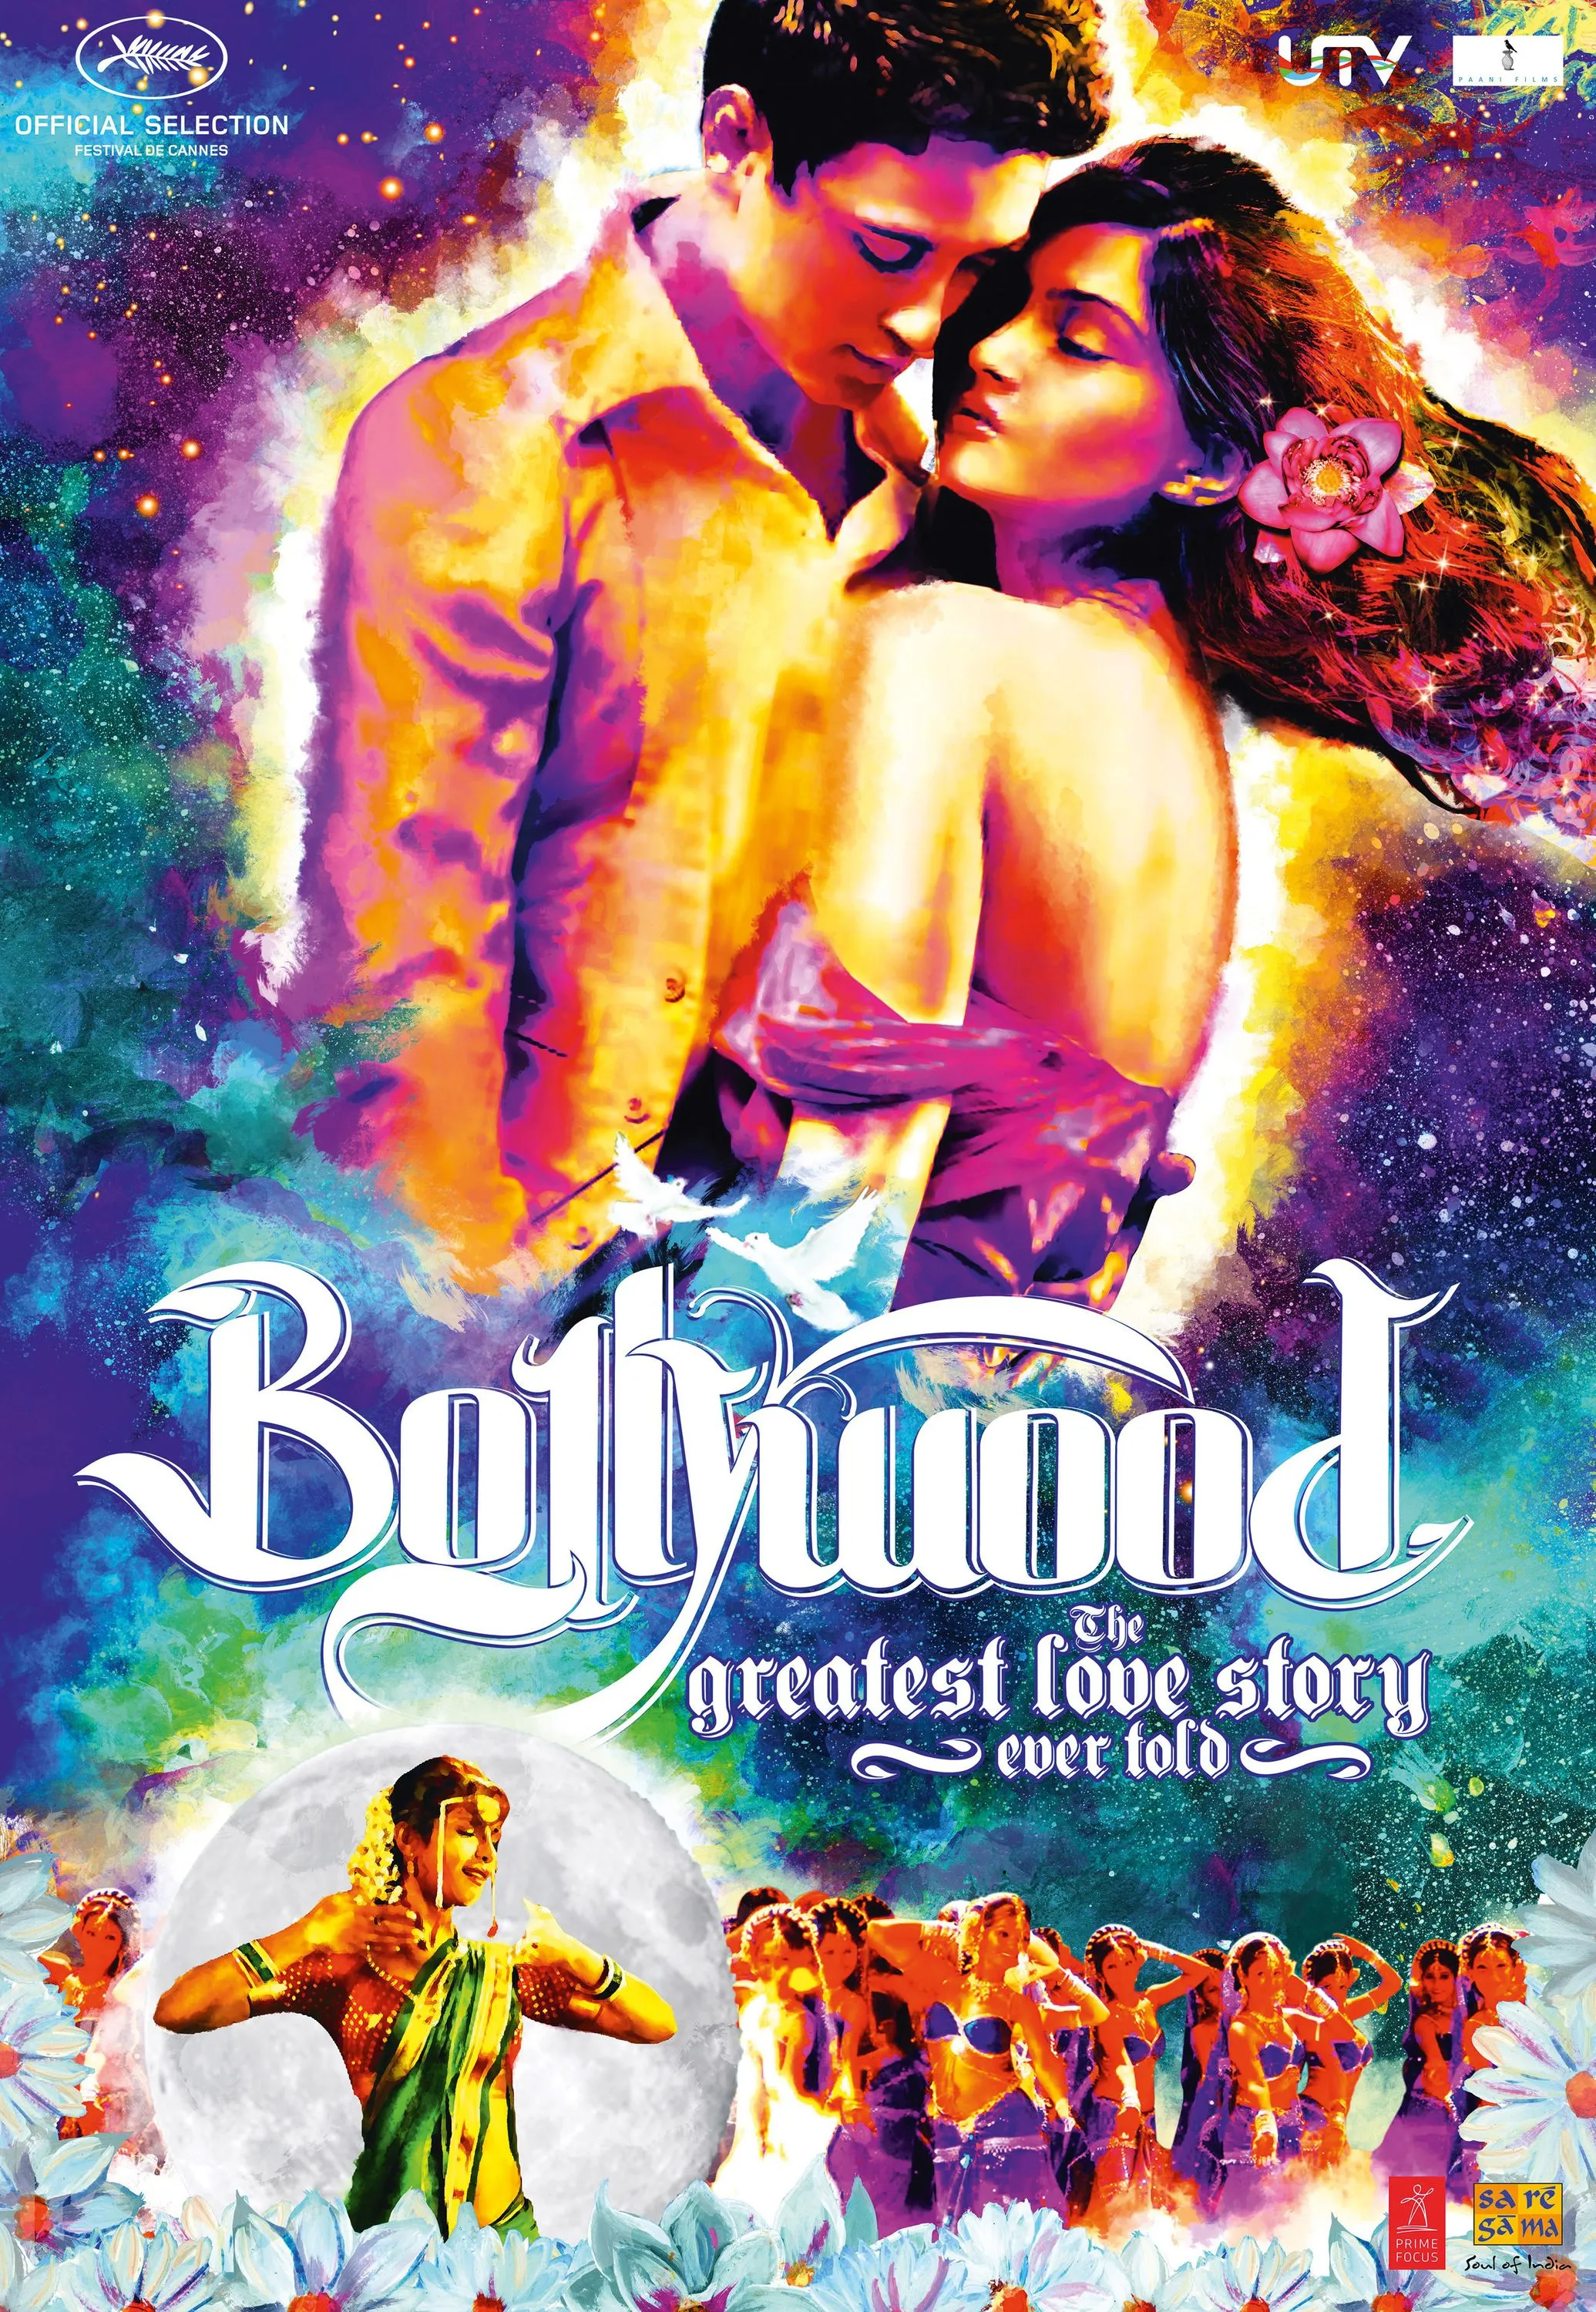  theme='esp-blue'>Doc. 1 Bollywood: The Greatest Love Story Ever Told